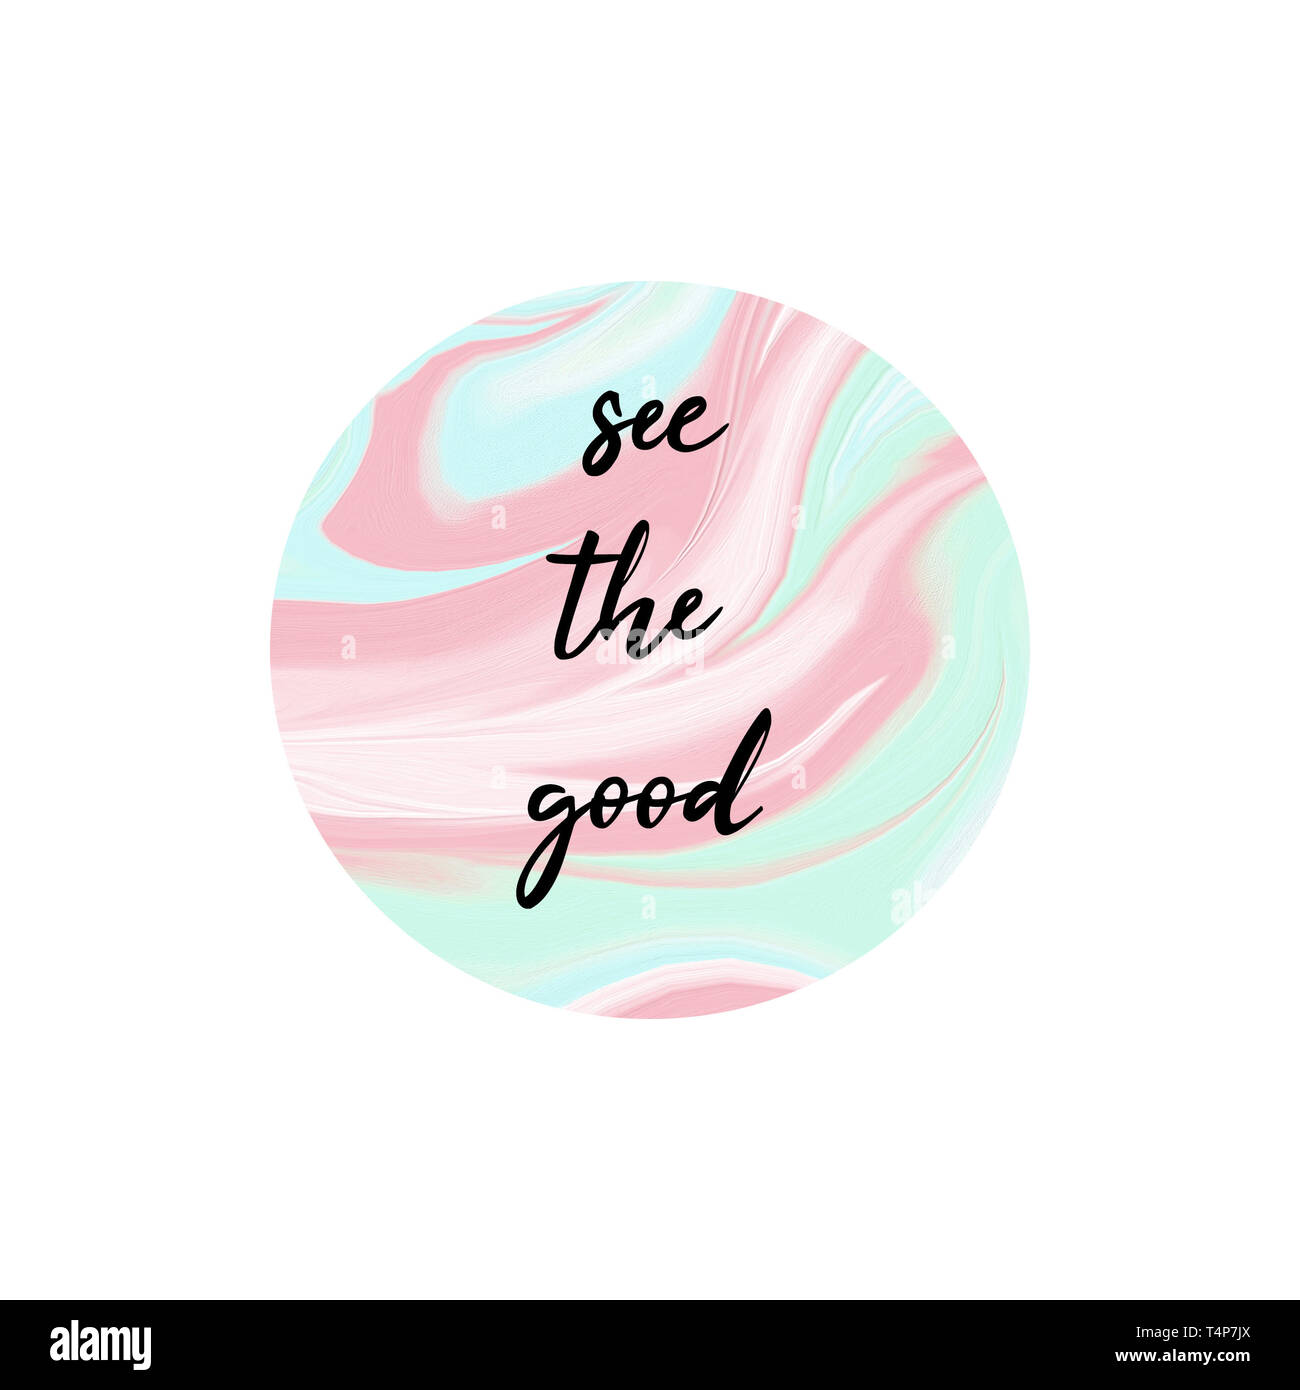 See the good. Motivational quote with holographic background. Stock Photo